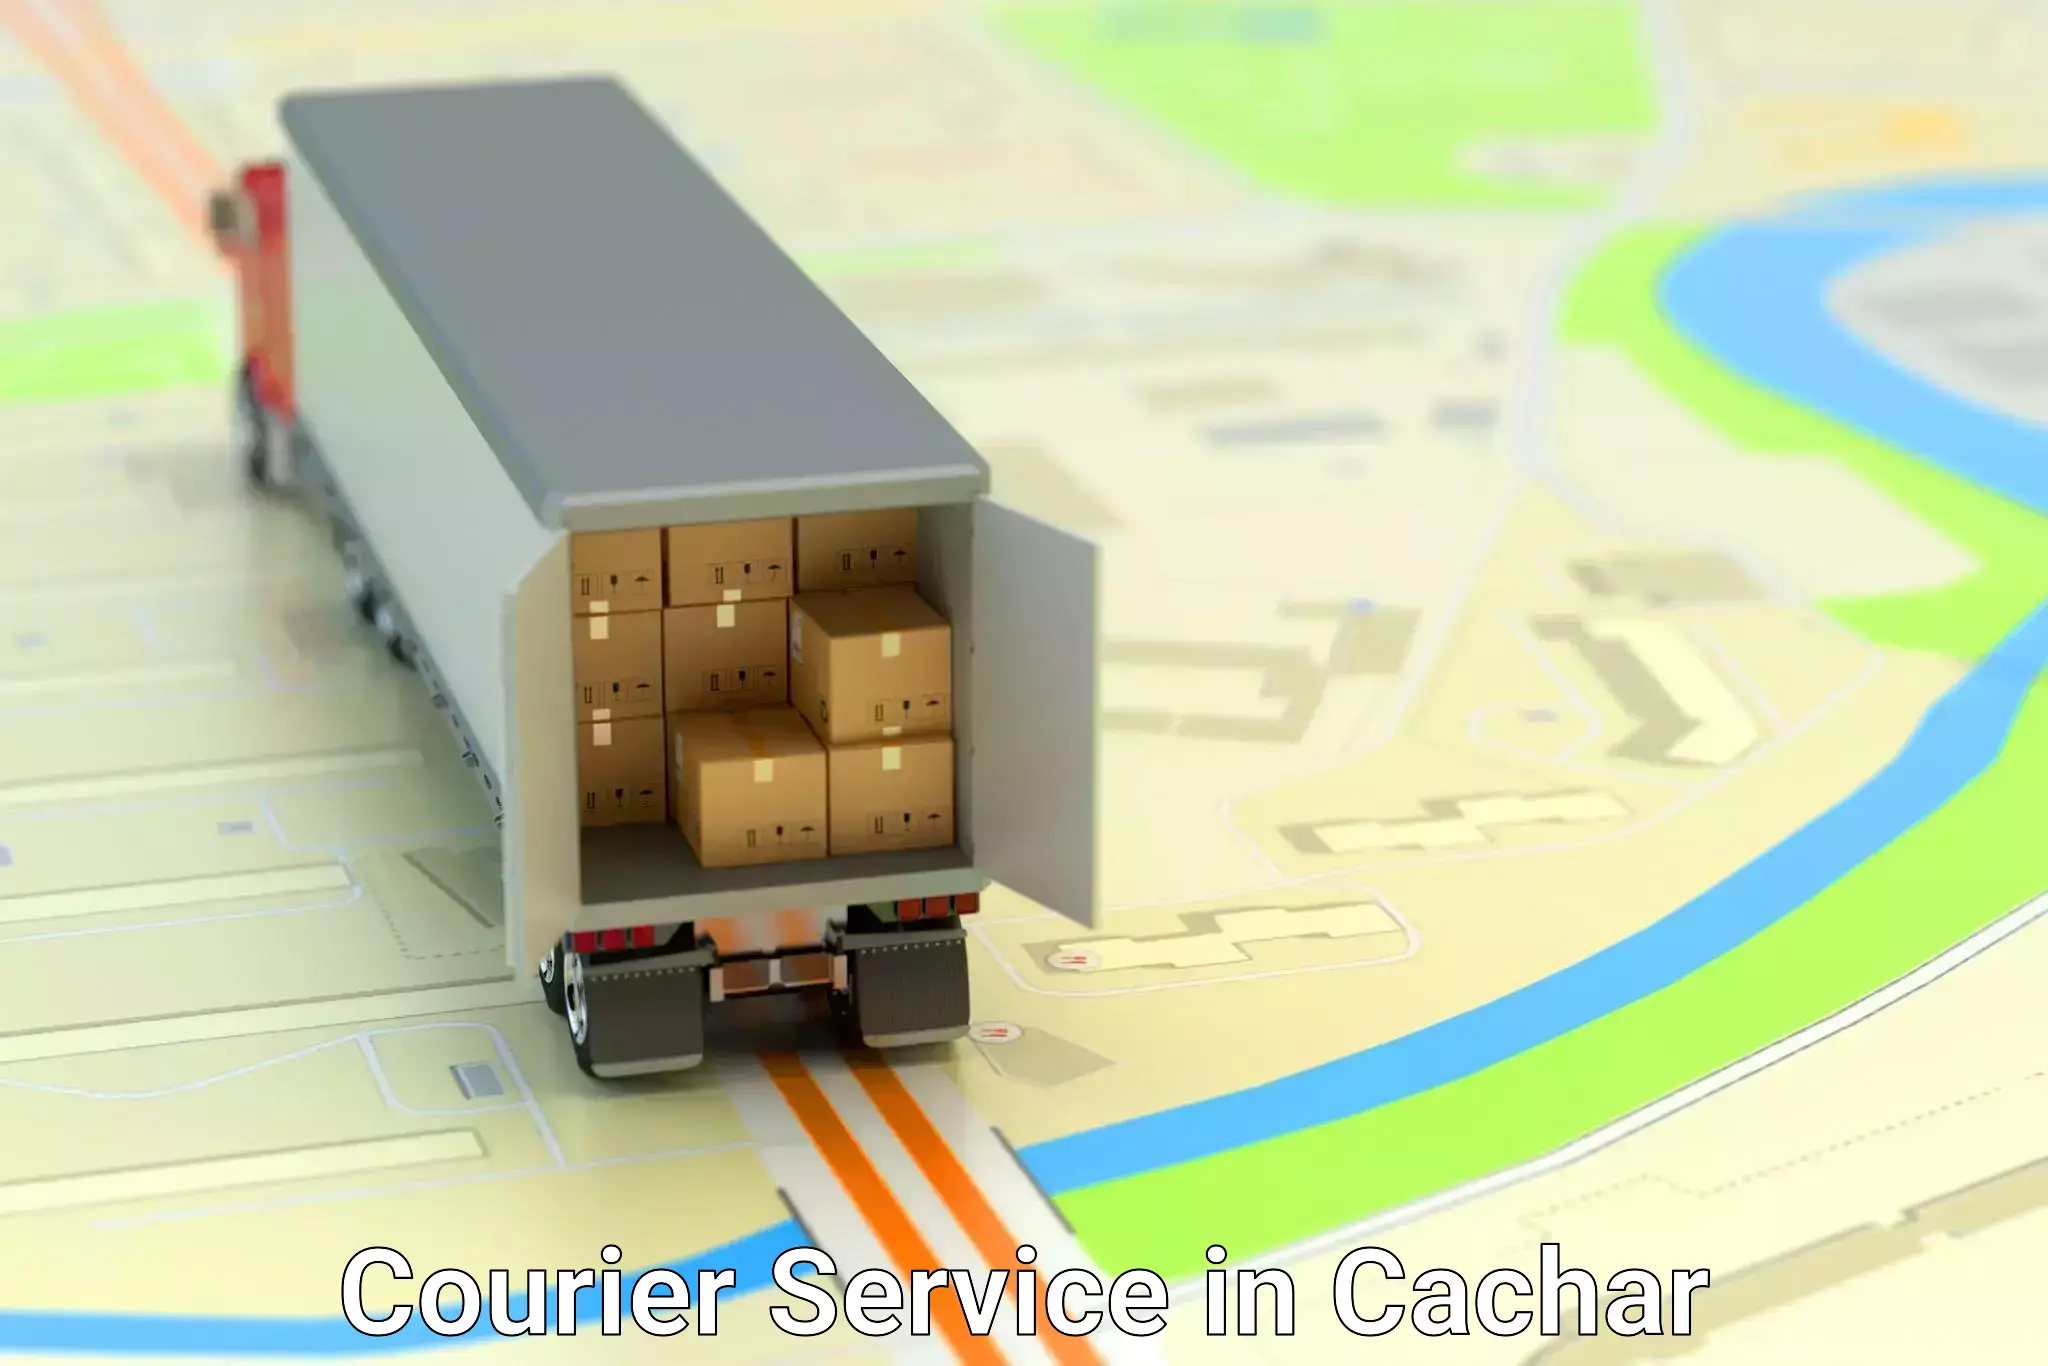 Express package handling in Cachar